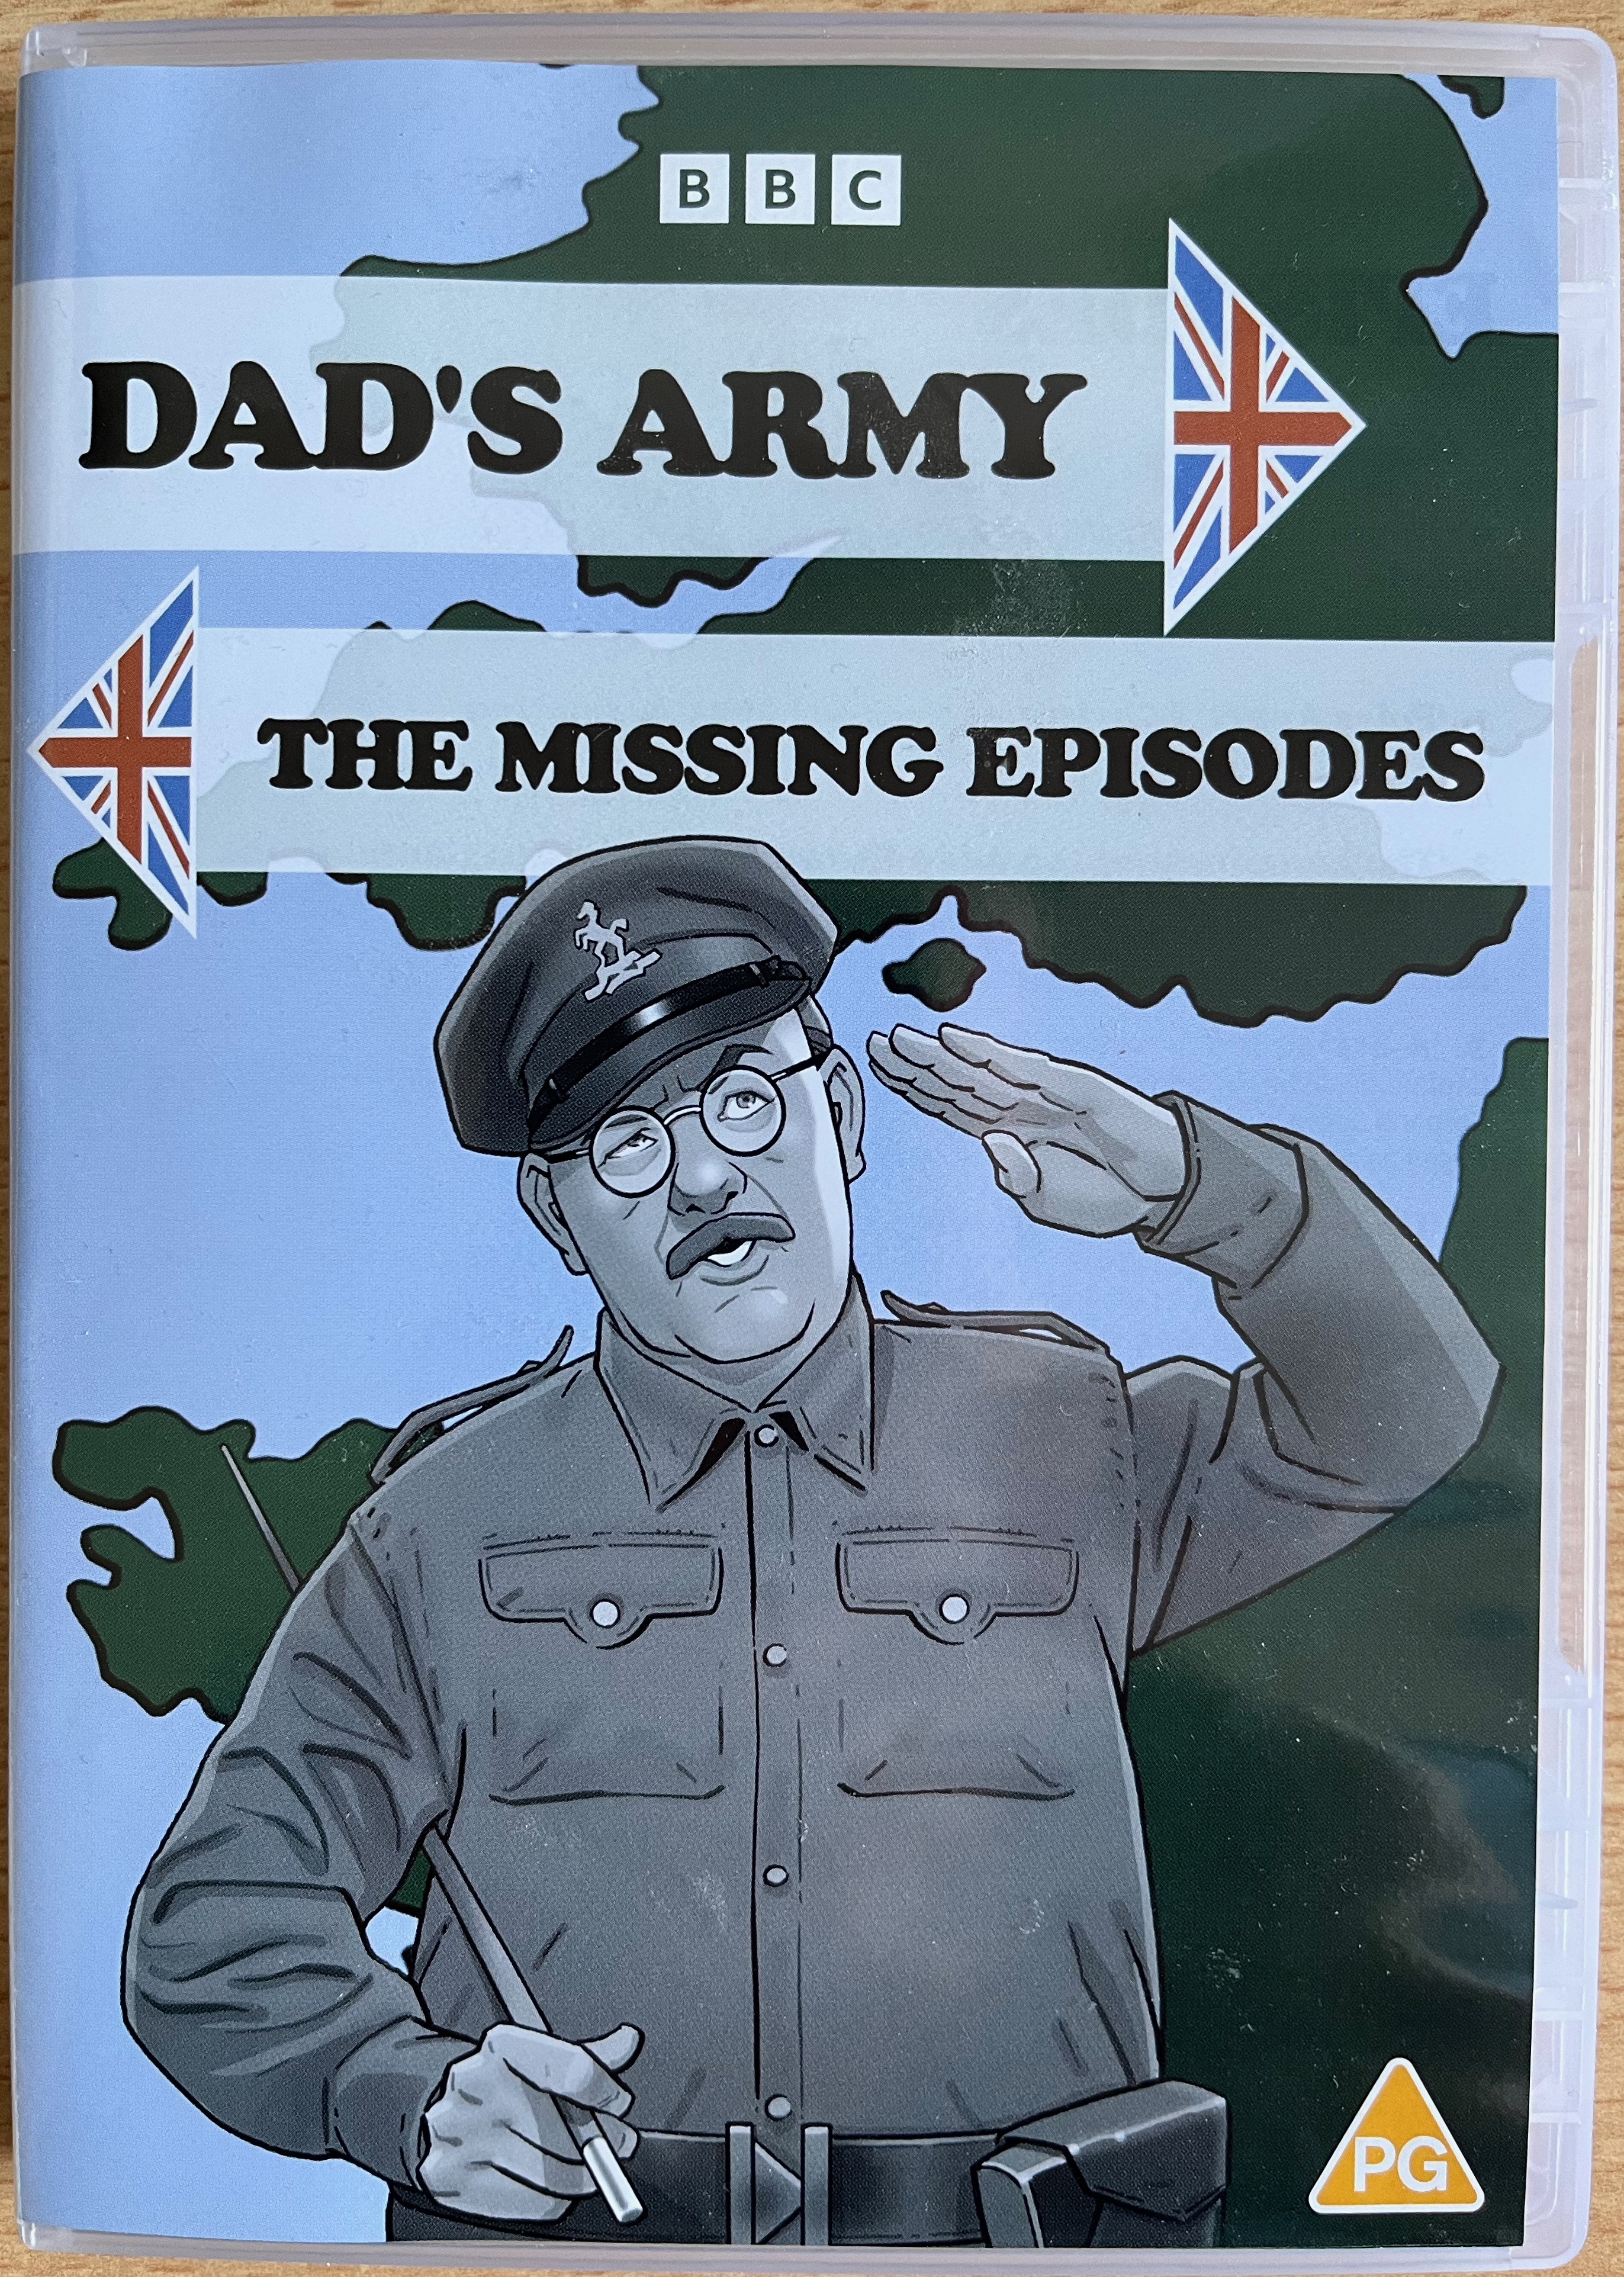 Front cover of the DVD for Dad's Army - The Missing Episodes, with a black and white animated version of Captain Mainwaring giving a salute.